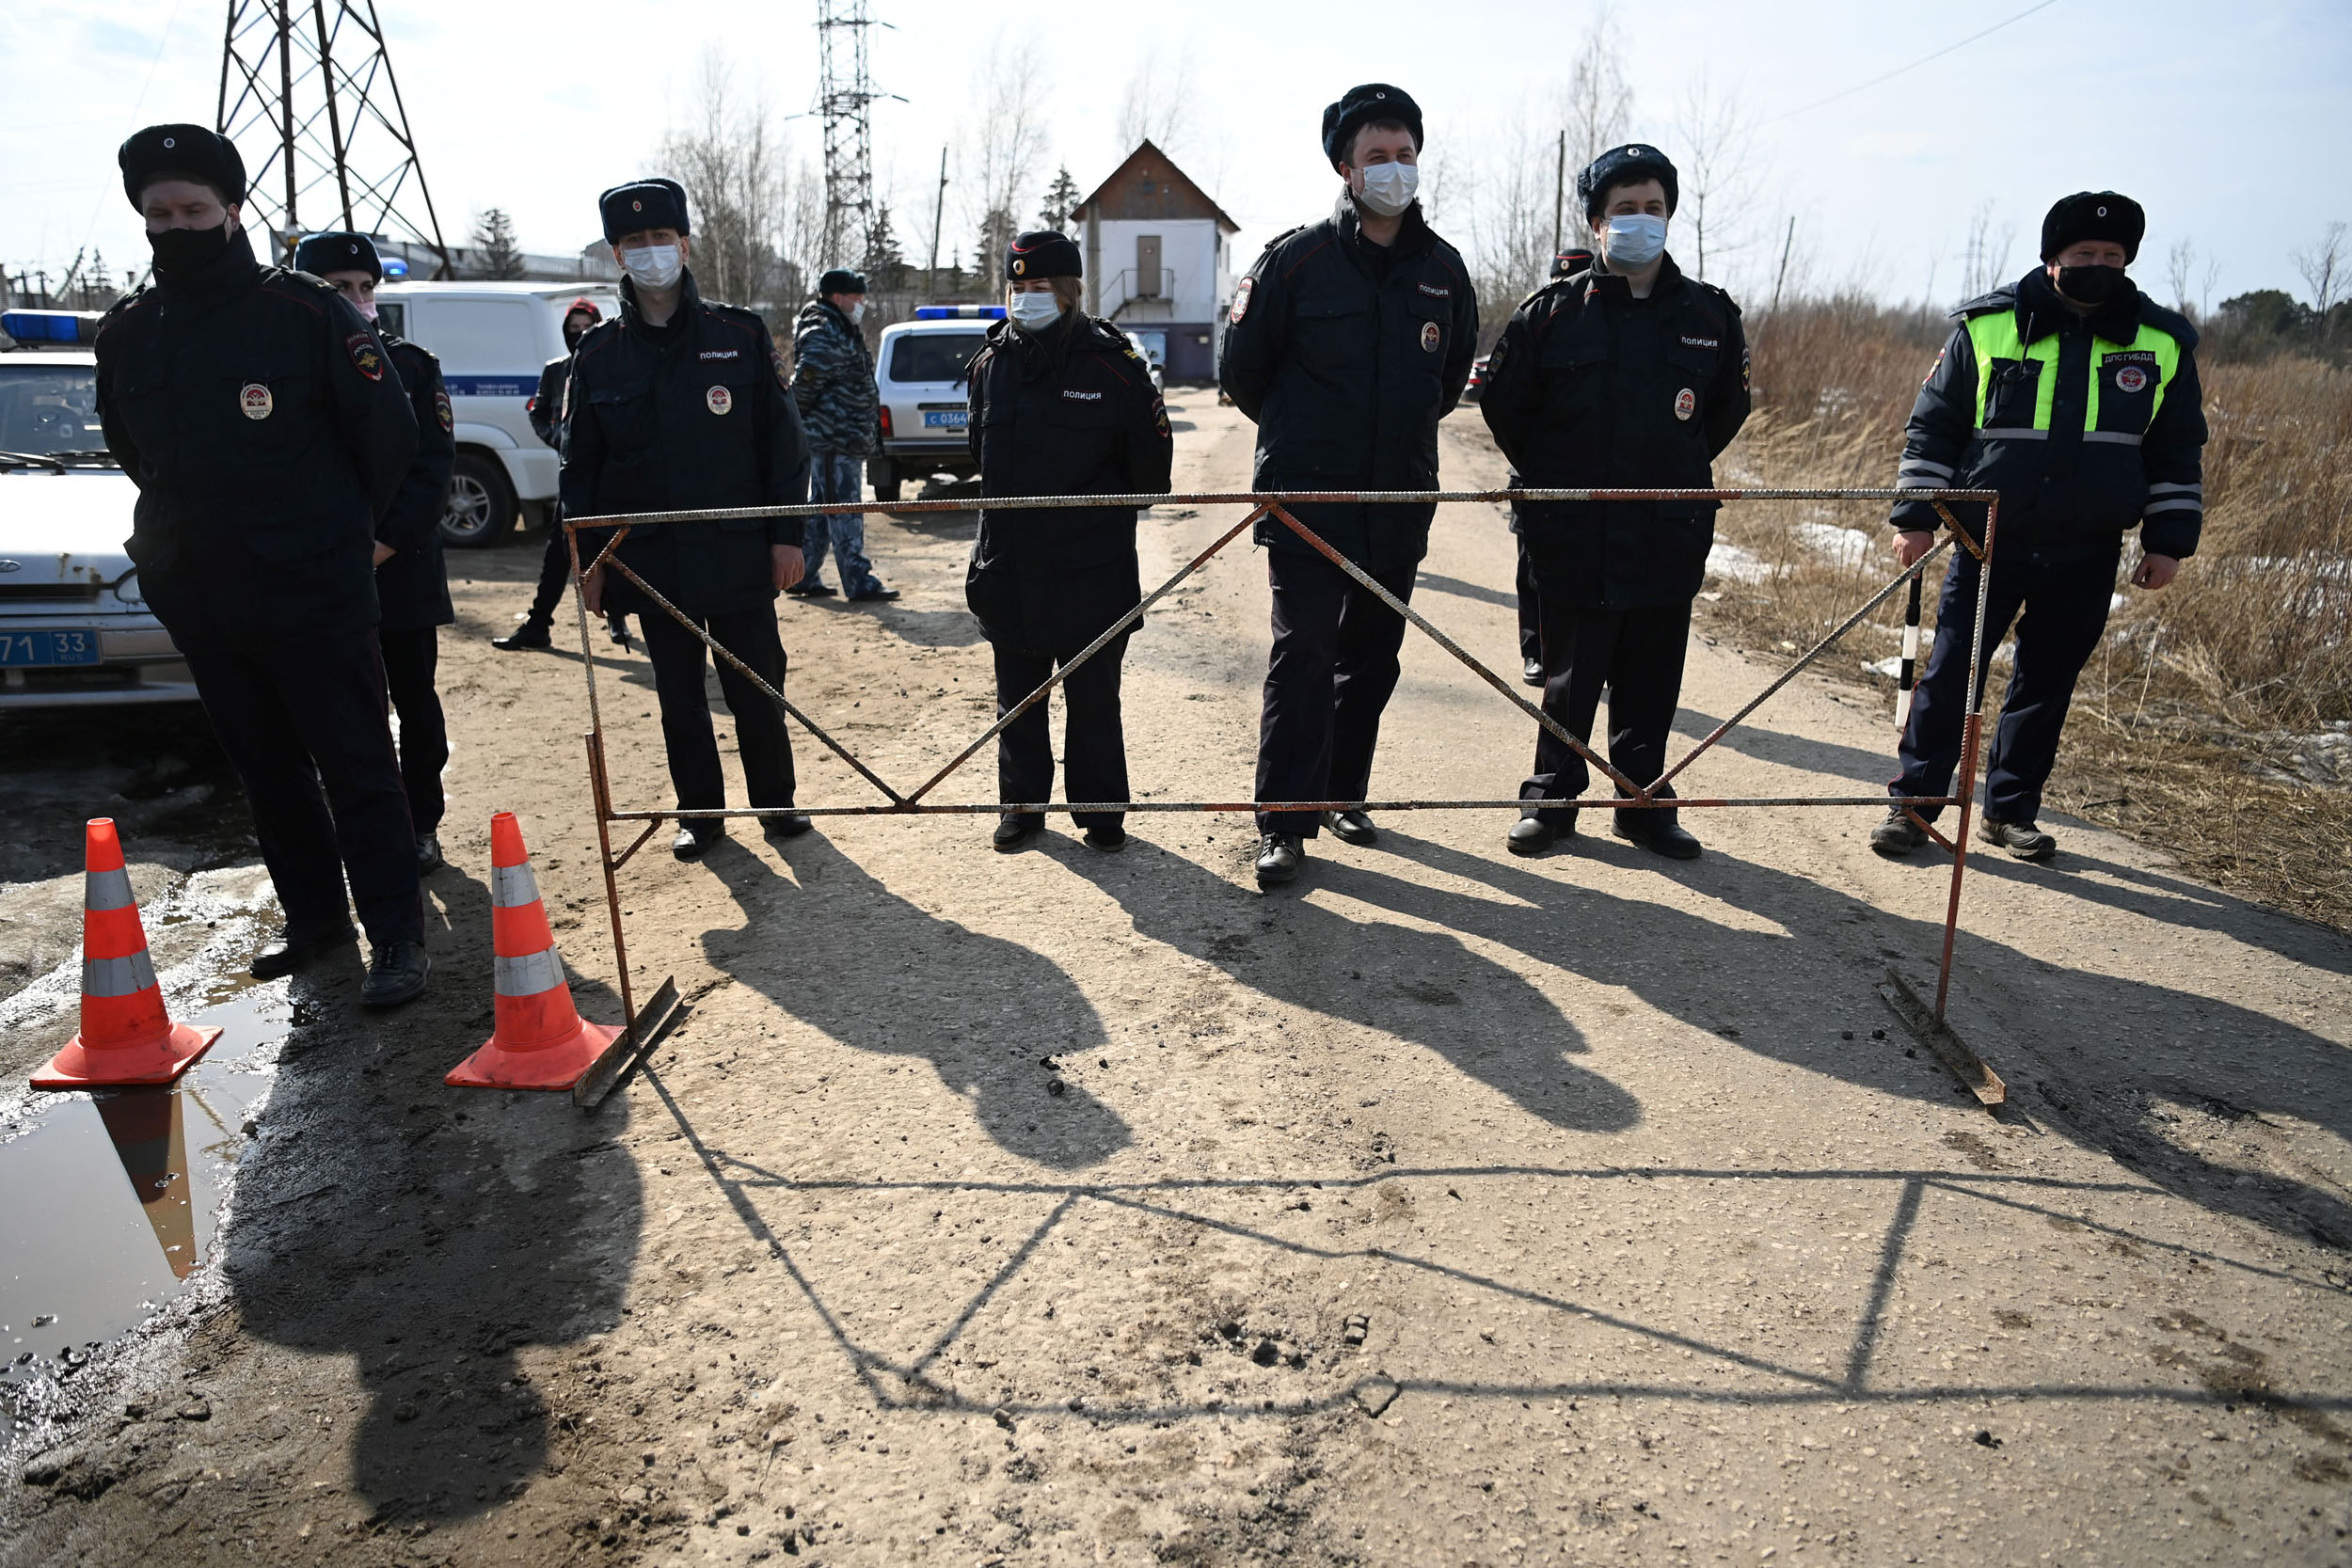 Russian police officers guard the entrance to the penal colony N2, where Kremlin critic Alexei Navalny has been transferred to serve a two-and-a-half year prison term for violating parole, in the town of Pokrov on April 6, 2021. - The Alliance of Doctors medical trade union said it would organise a protest outside the penal colony in Pokrov on Tuesday, demanding Navalny to receive adequate medical treatment. (Photo by Kirill KUDRYAVTSEV / AFP)